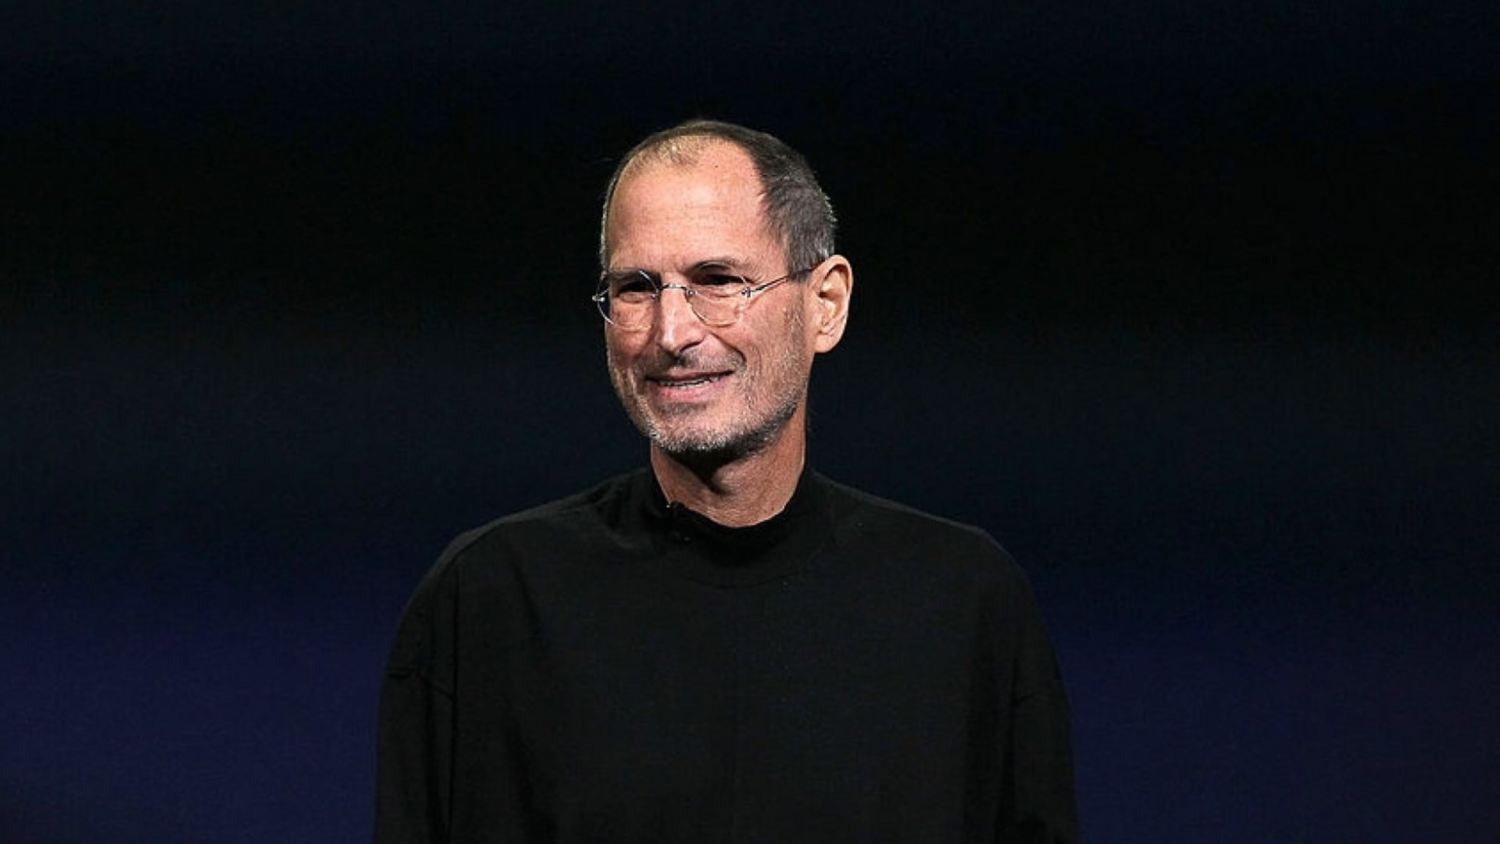 Steve Jobs' Death Was Due To Strange "cures"